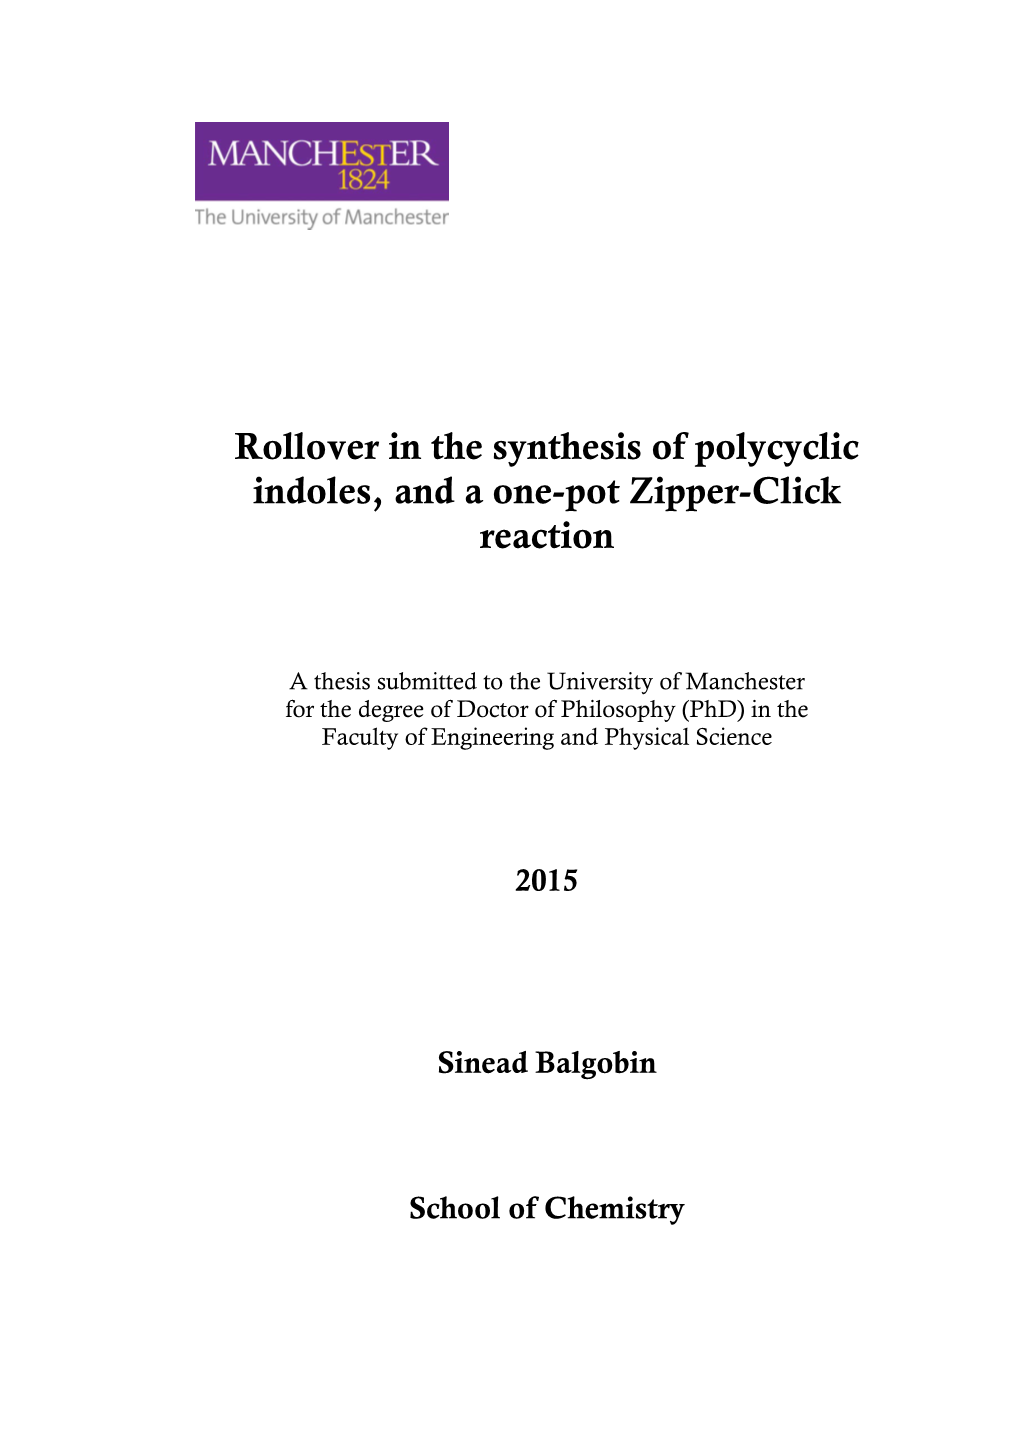 Rollover in the Synthesis of Polycyclic Indoles, and a One-Pot Zipper-Click Reaction